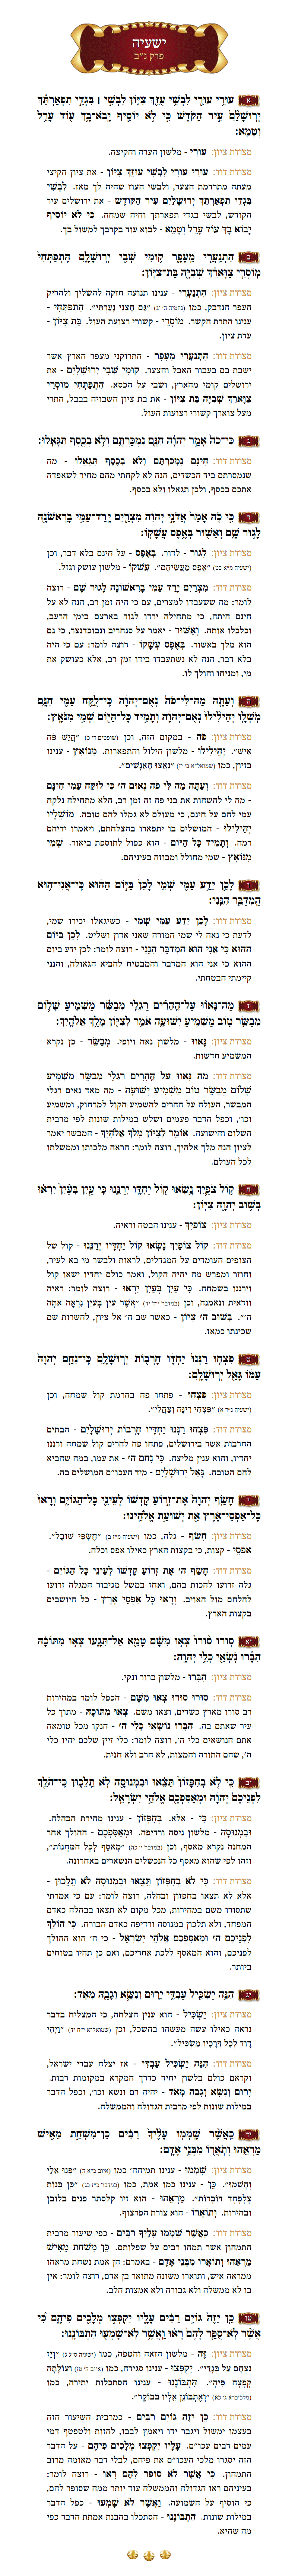 Sefer Yeshayohu Chapter 52 with commentary